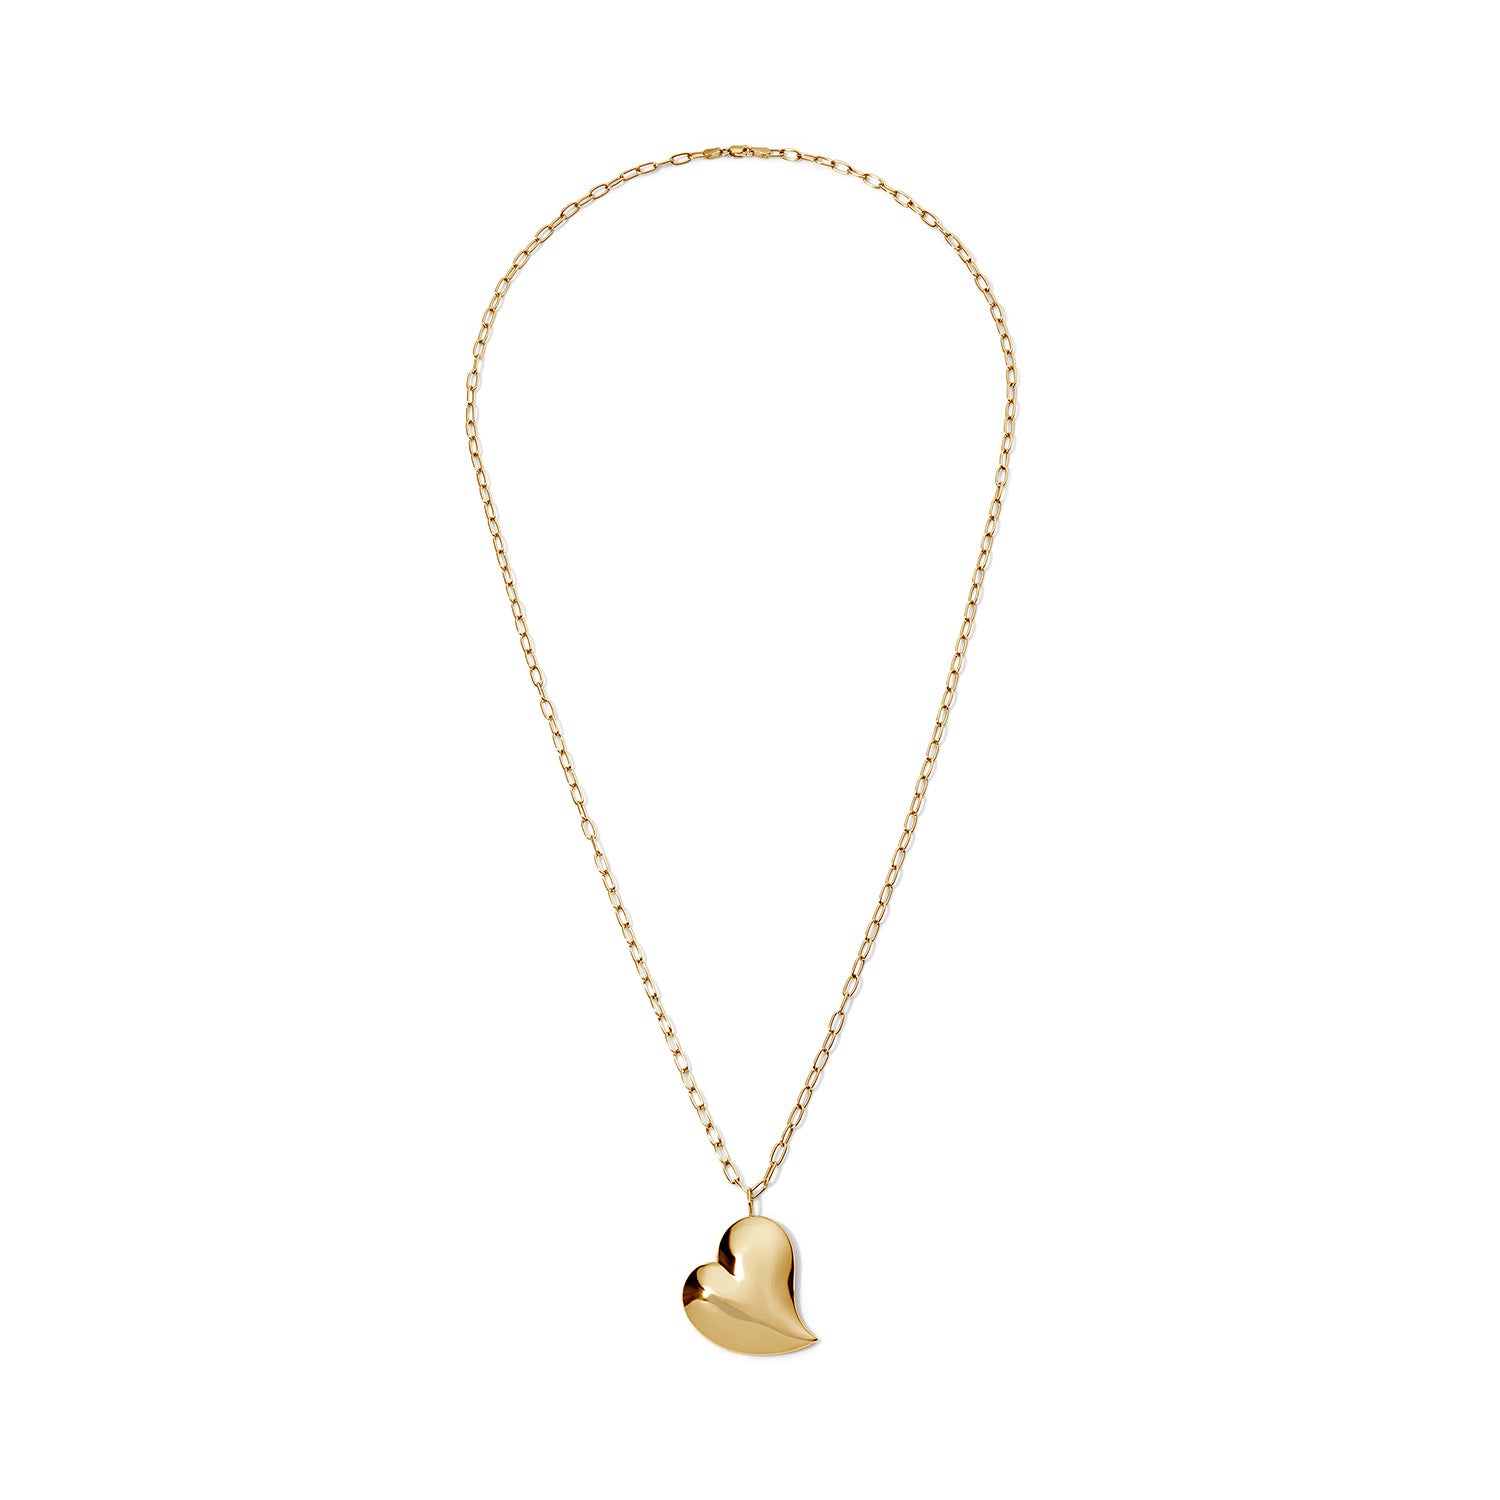 Heartfelt Gold Jumbo Puffy Heart with Paperclip Chain Necklace